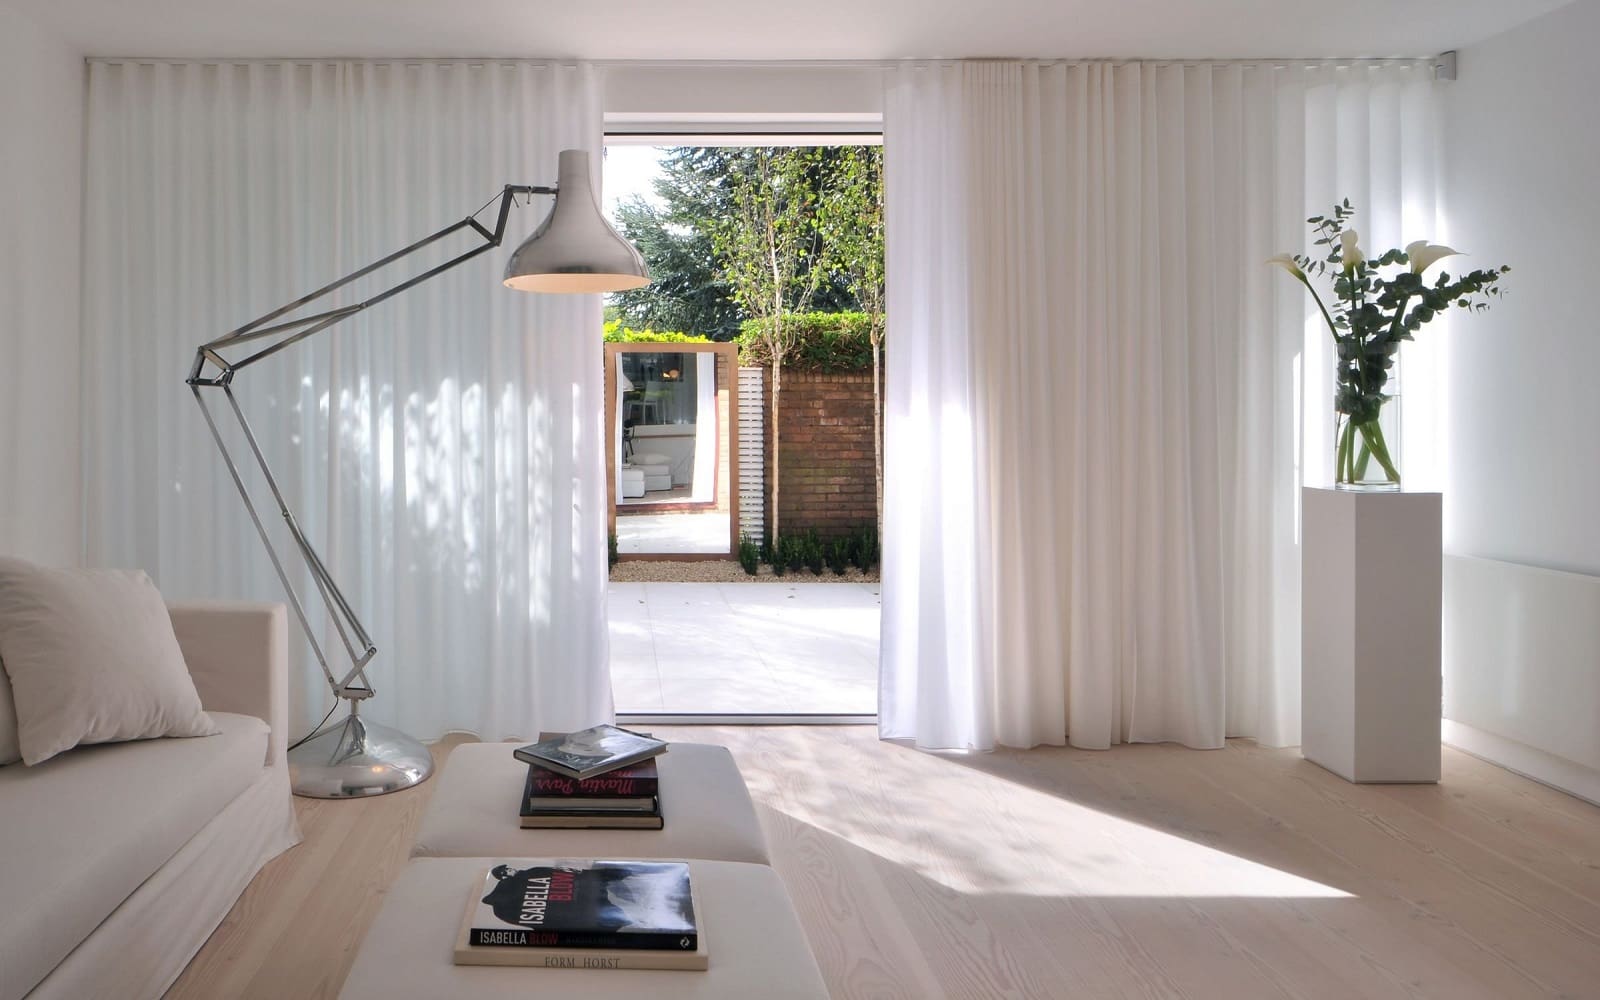 Curtain Length Rules – How Long Should Your Curtains Be?